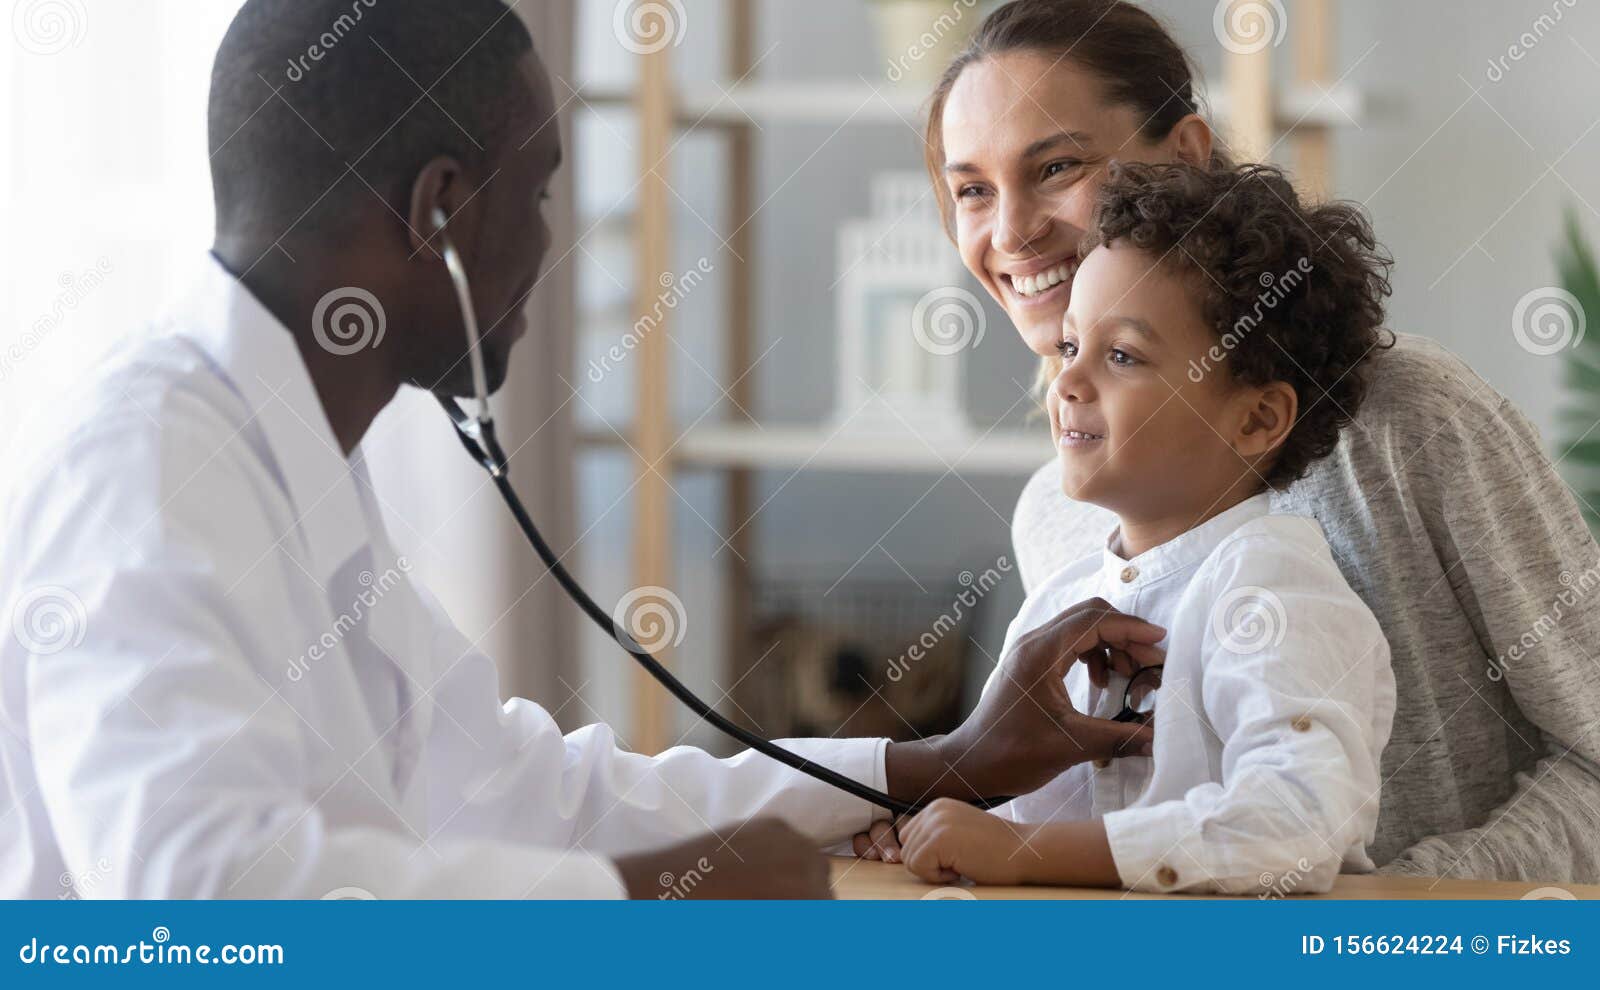 african male pediatrician hold stethoscope exam child boy patient